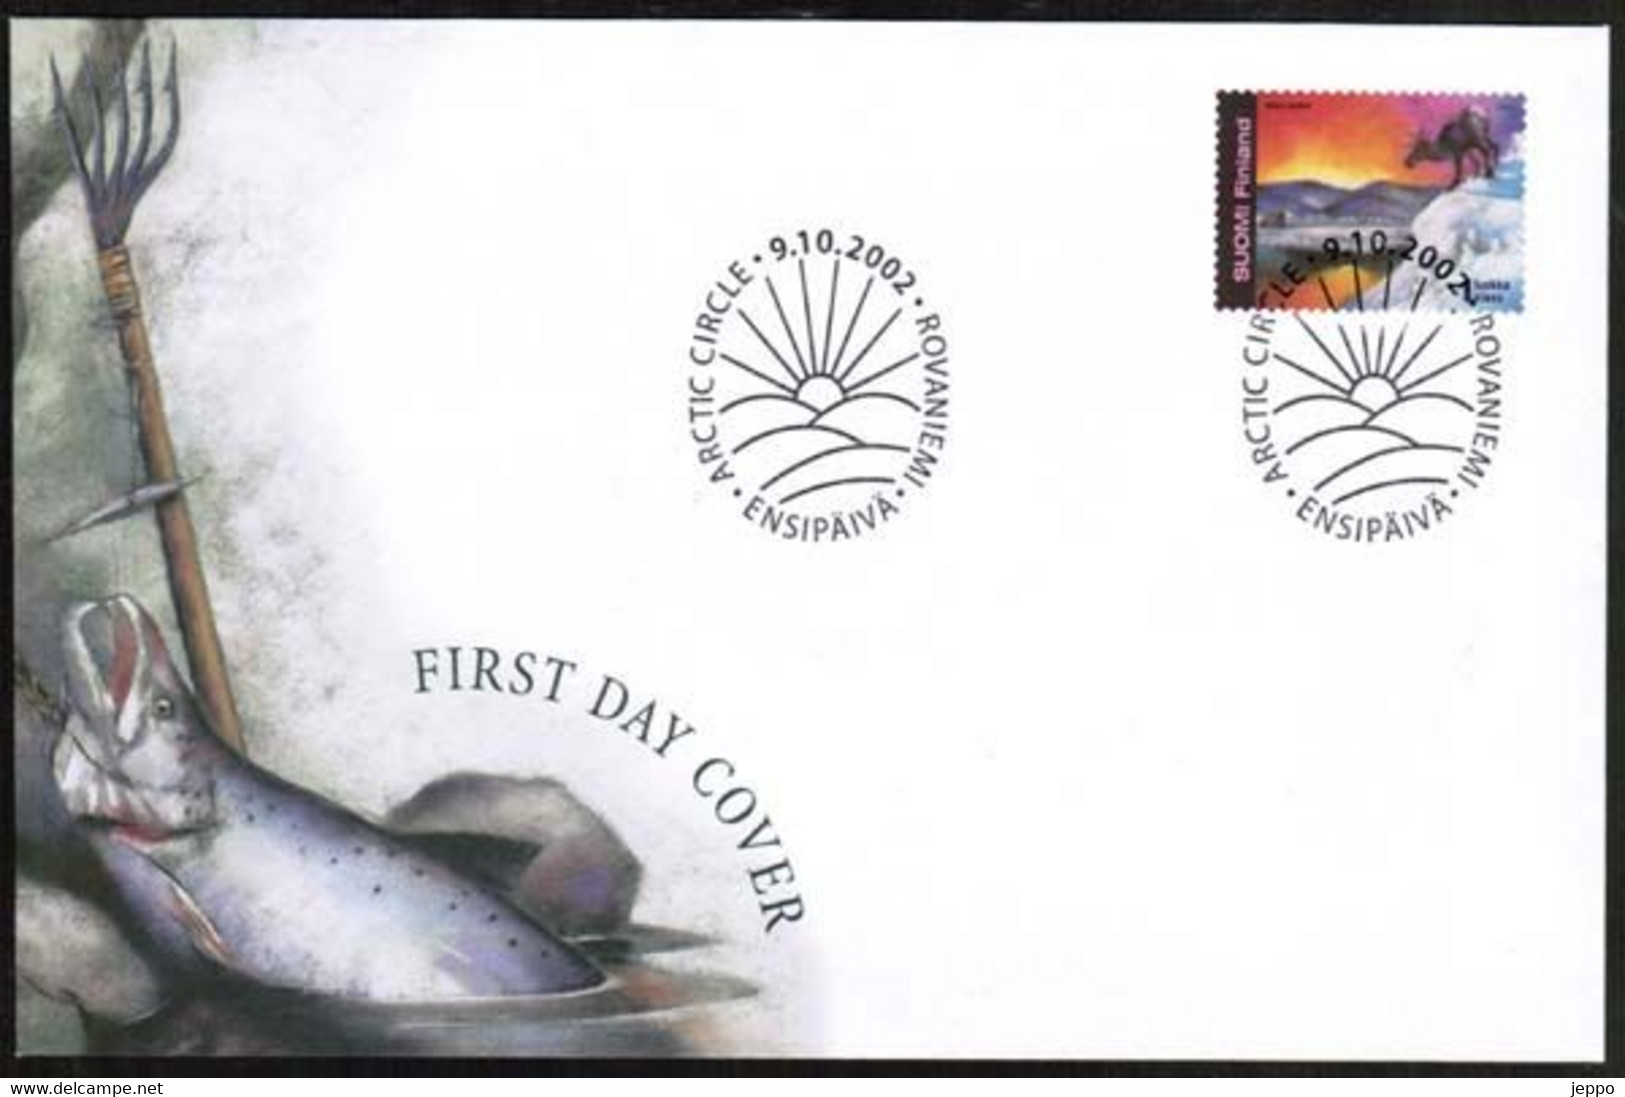 2002 Finland, Lapland FDC. - FDC